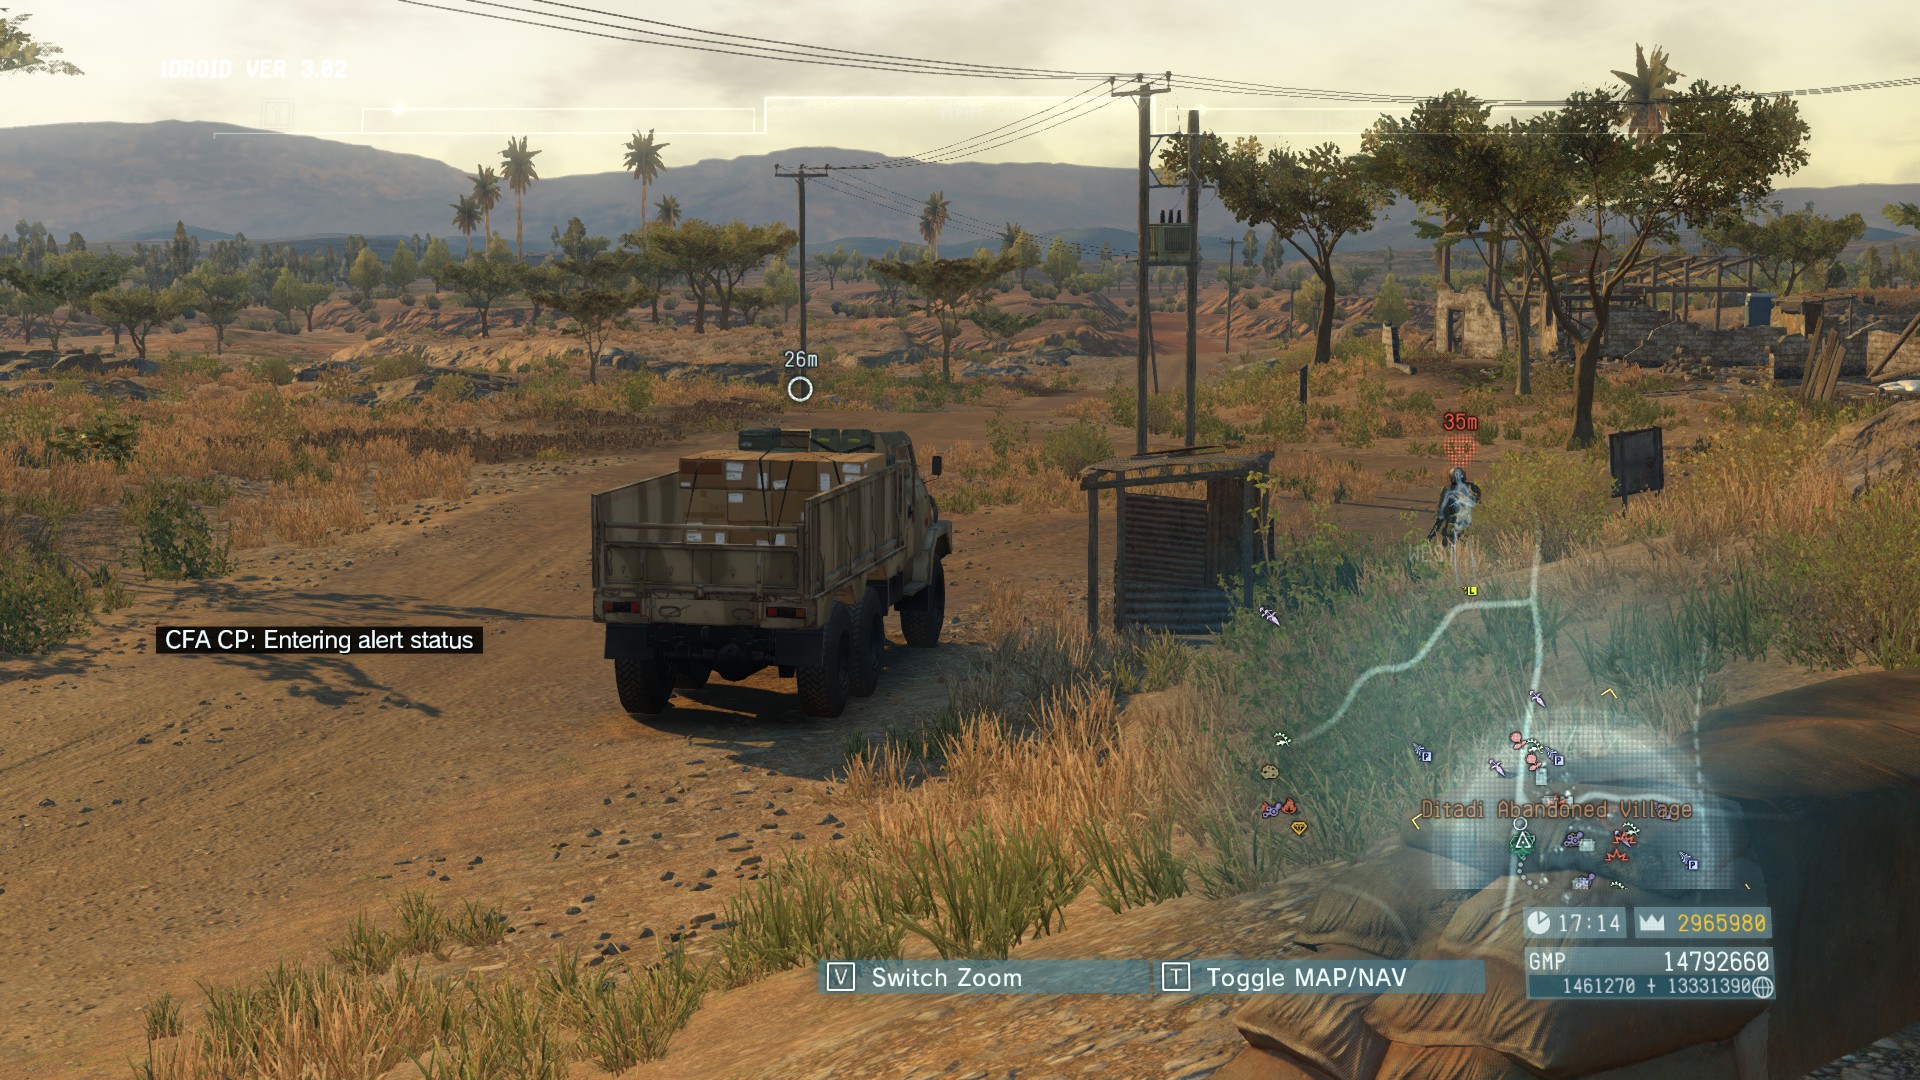 METAL GEAR SOLID V: THE PHANTOM PAIN - All Vehicles and Missions Guide - Footprints Of Phantoms - A607041